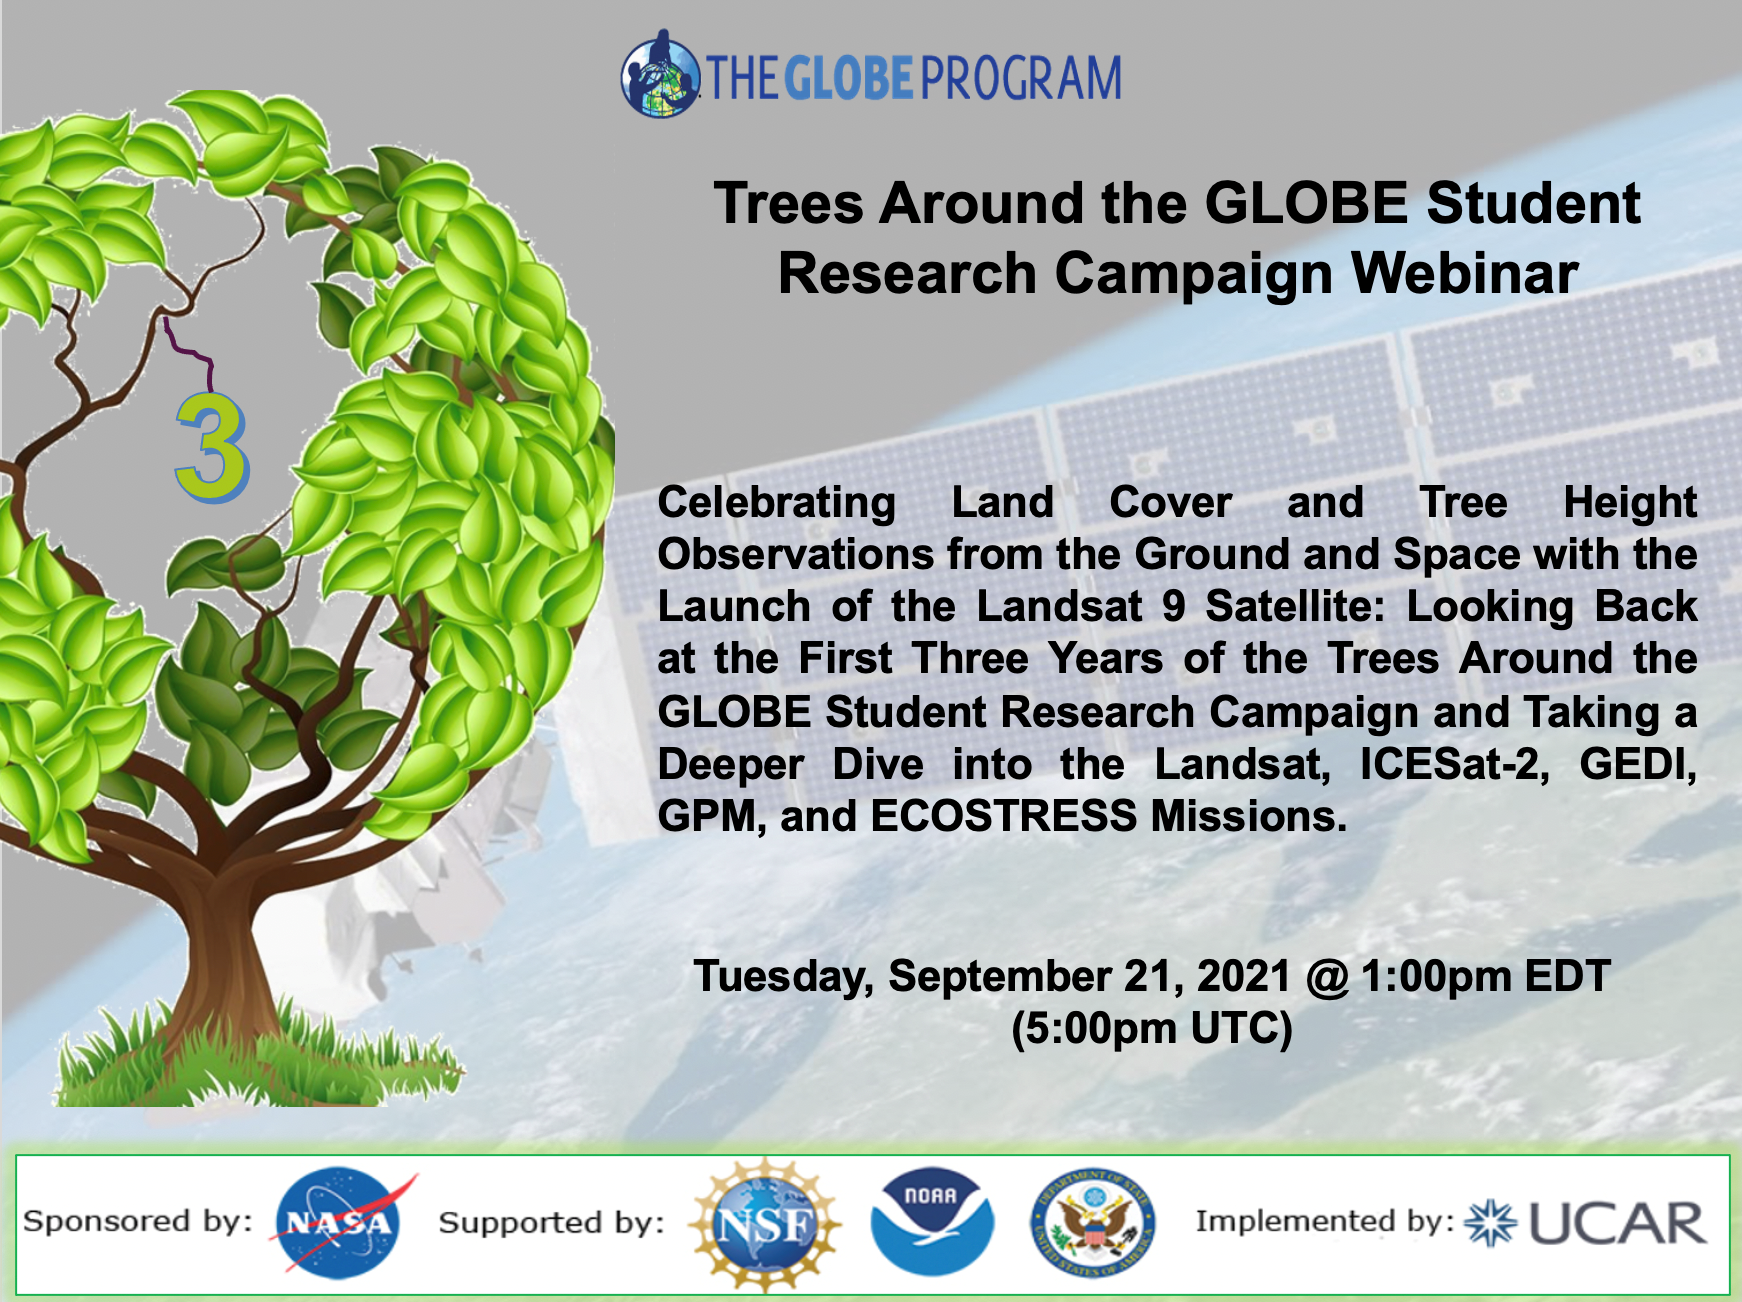 Trees Around the GLOBE 21 September webinar shareable showing a tree and reading, "Trees Around the GLOBE Student Research Campaign Webinar: